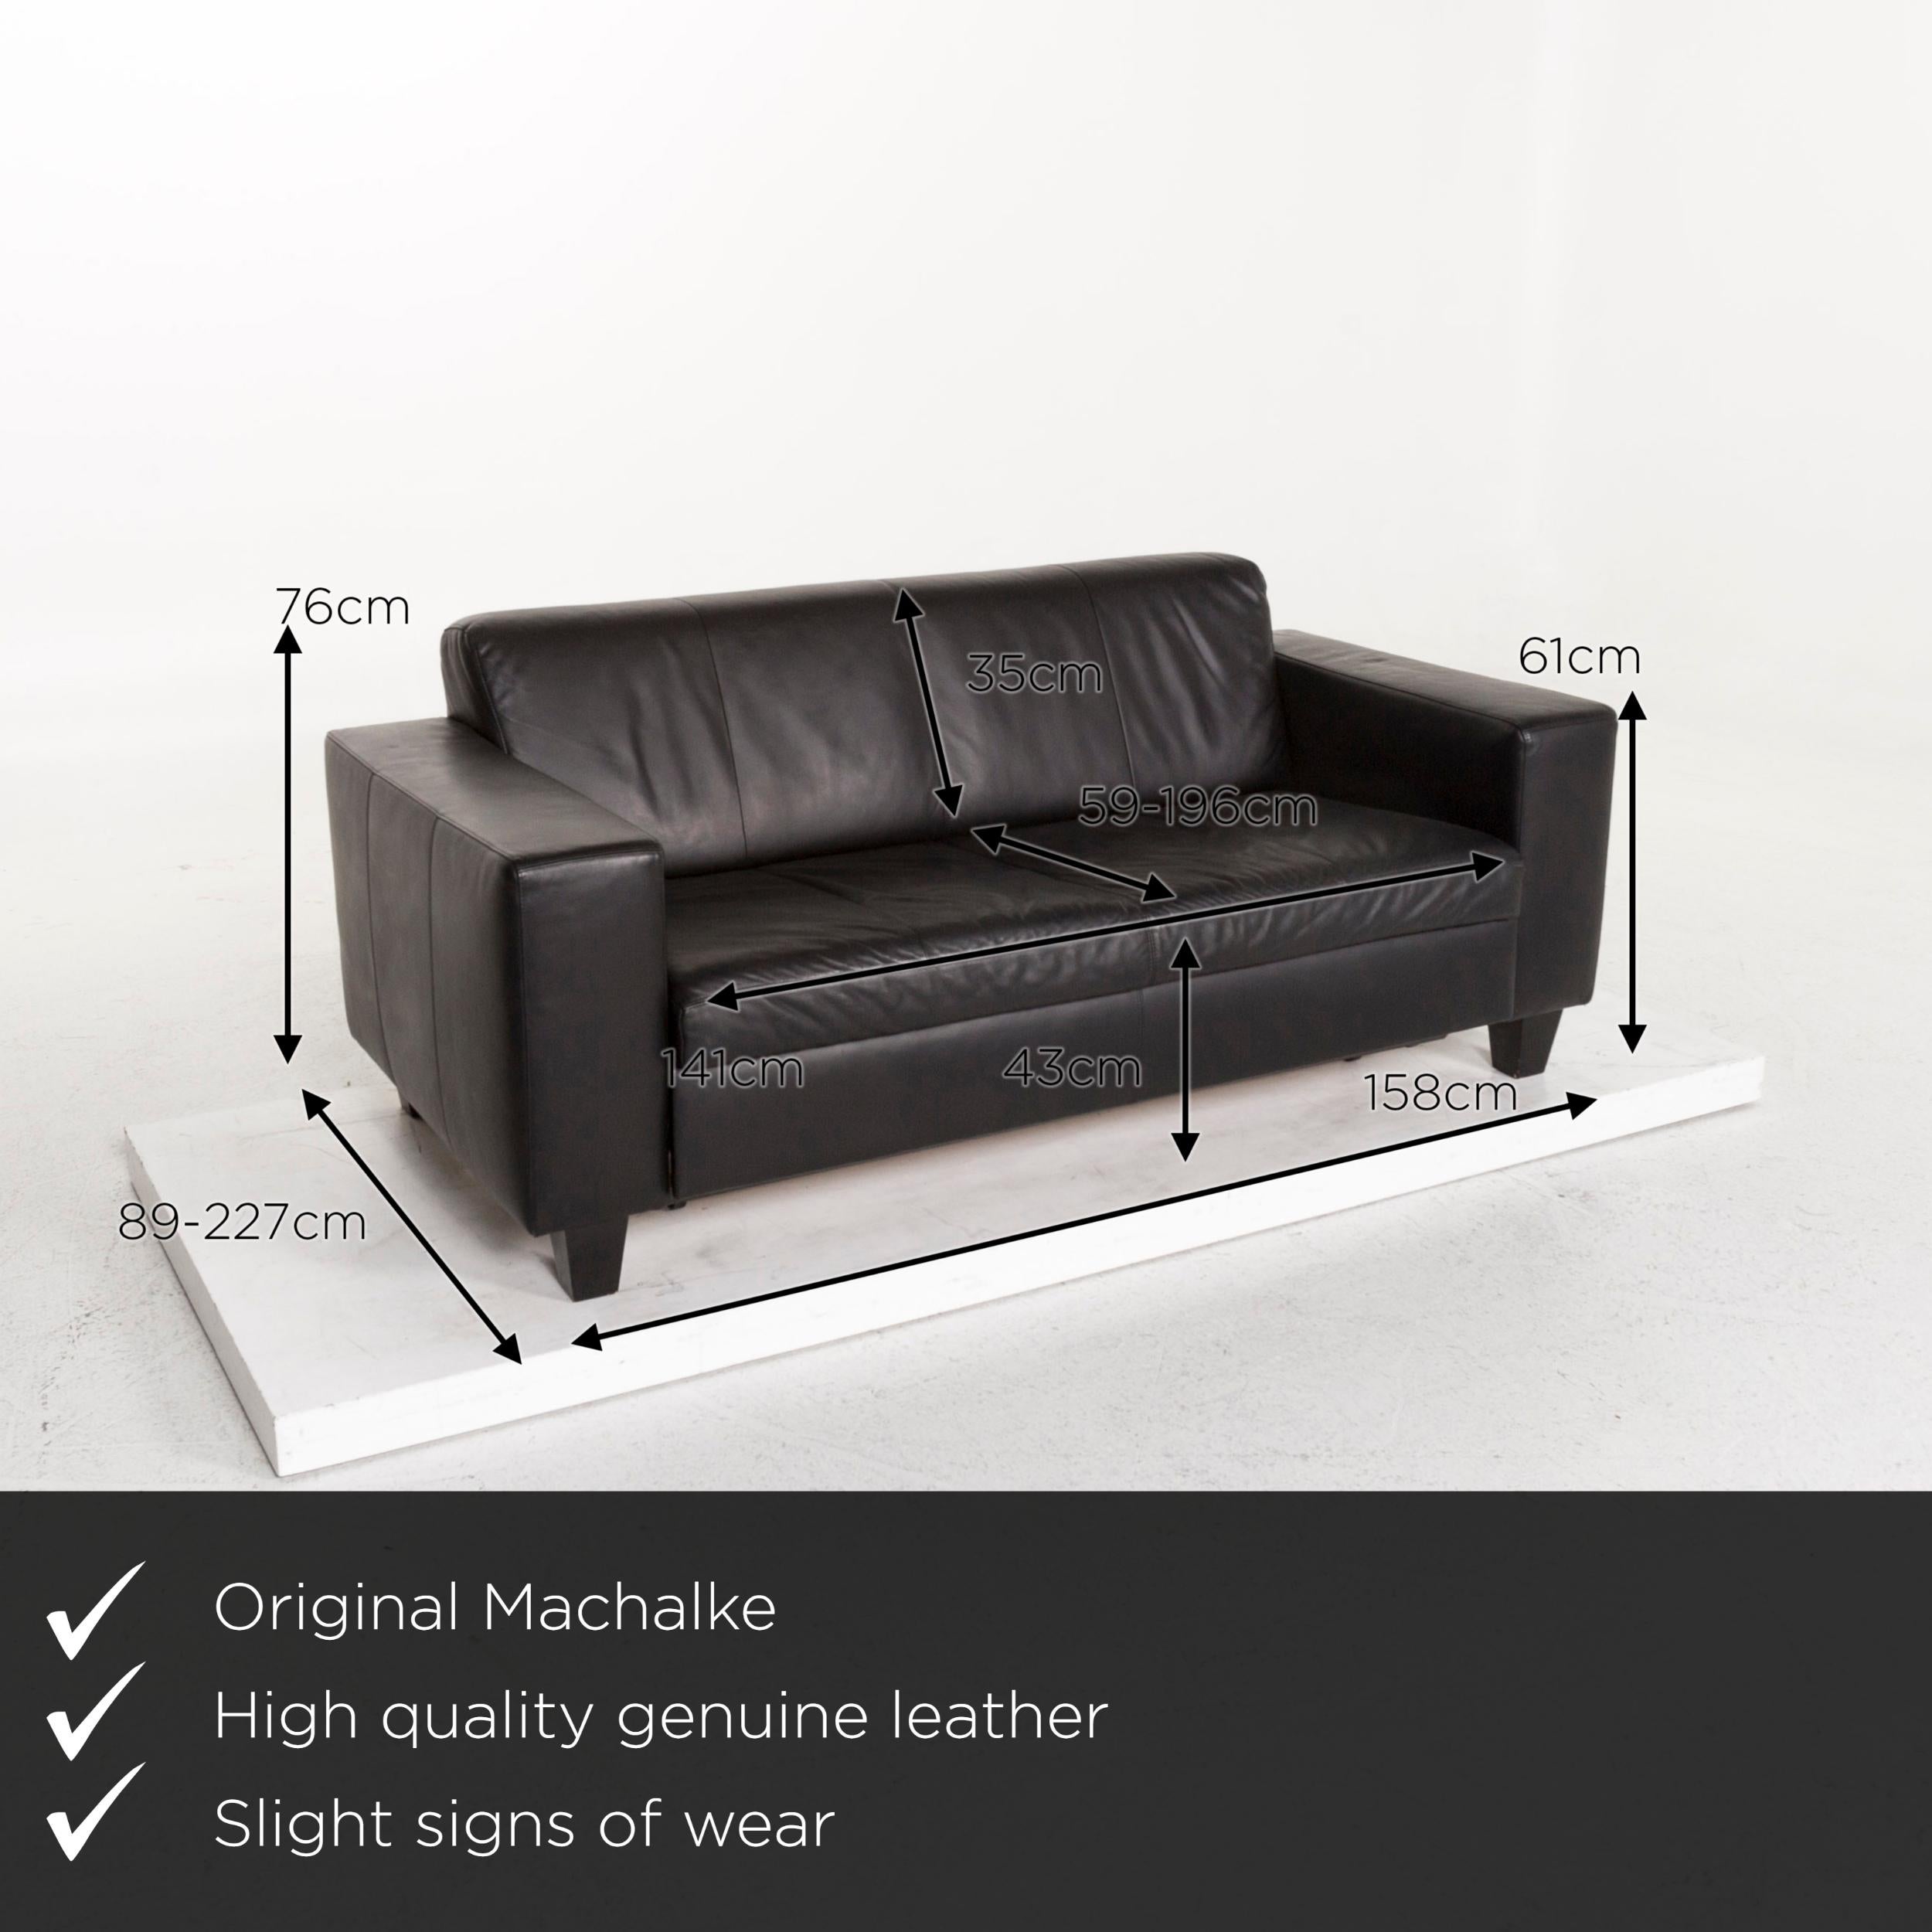 We present to you a Machalke leather sofa bed black two-seat sofa sleep function couch.
 

 Product measurements in centimeters:
 

Depth 89
Width 158
Height 76
Seat height 43
Rest height 61
Seat depth 59
Seat width 141
Back height